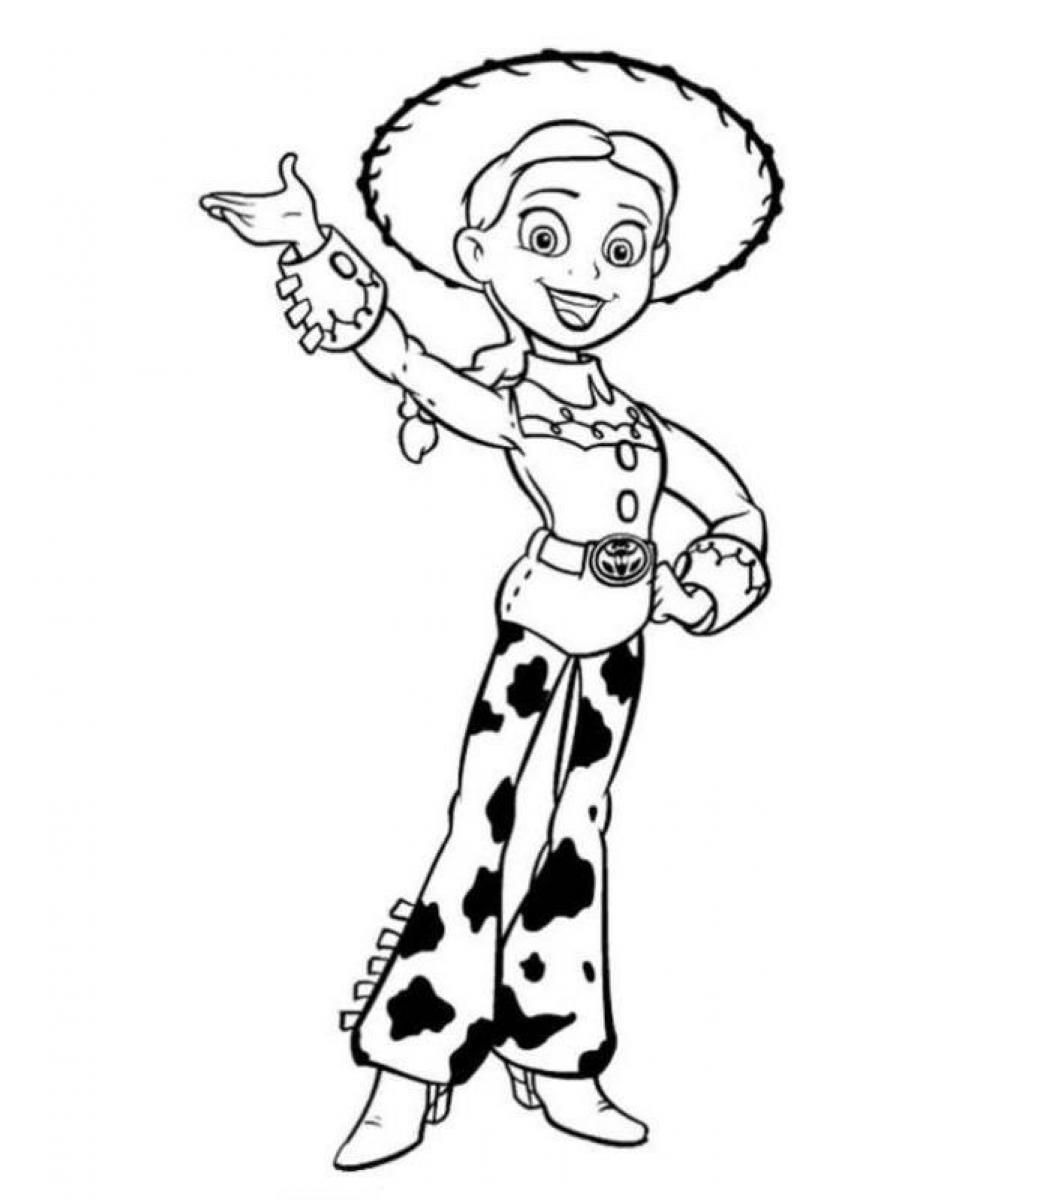 Disney Toy Story 3 Coloring Pages | Coloring Online